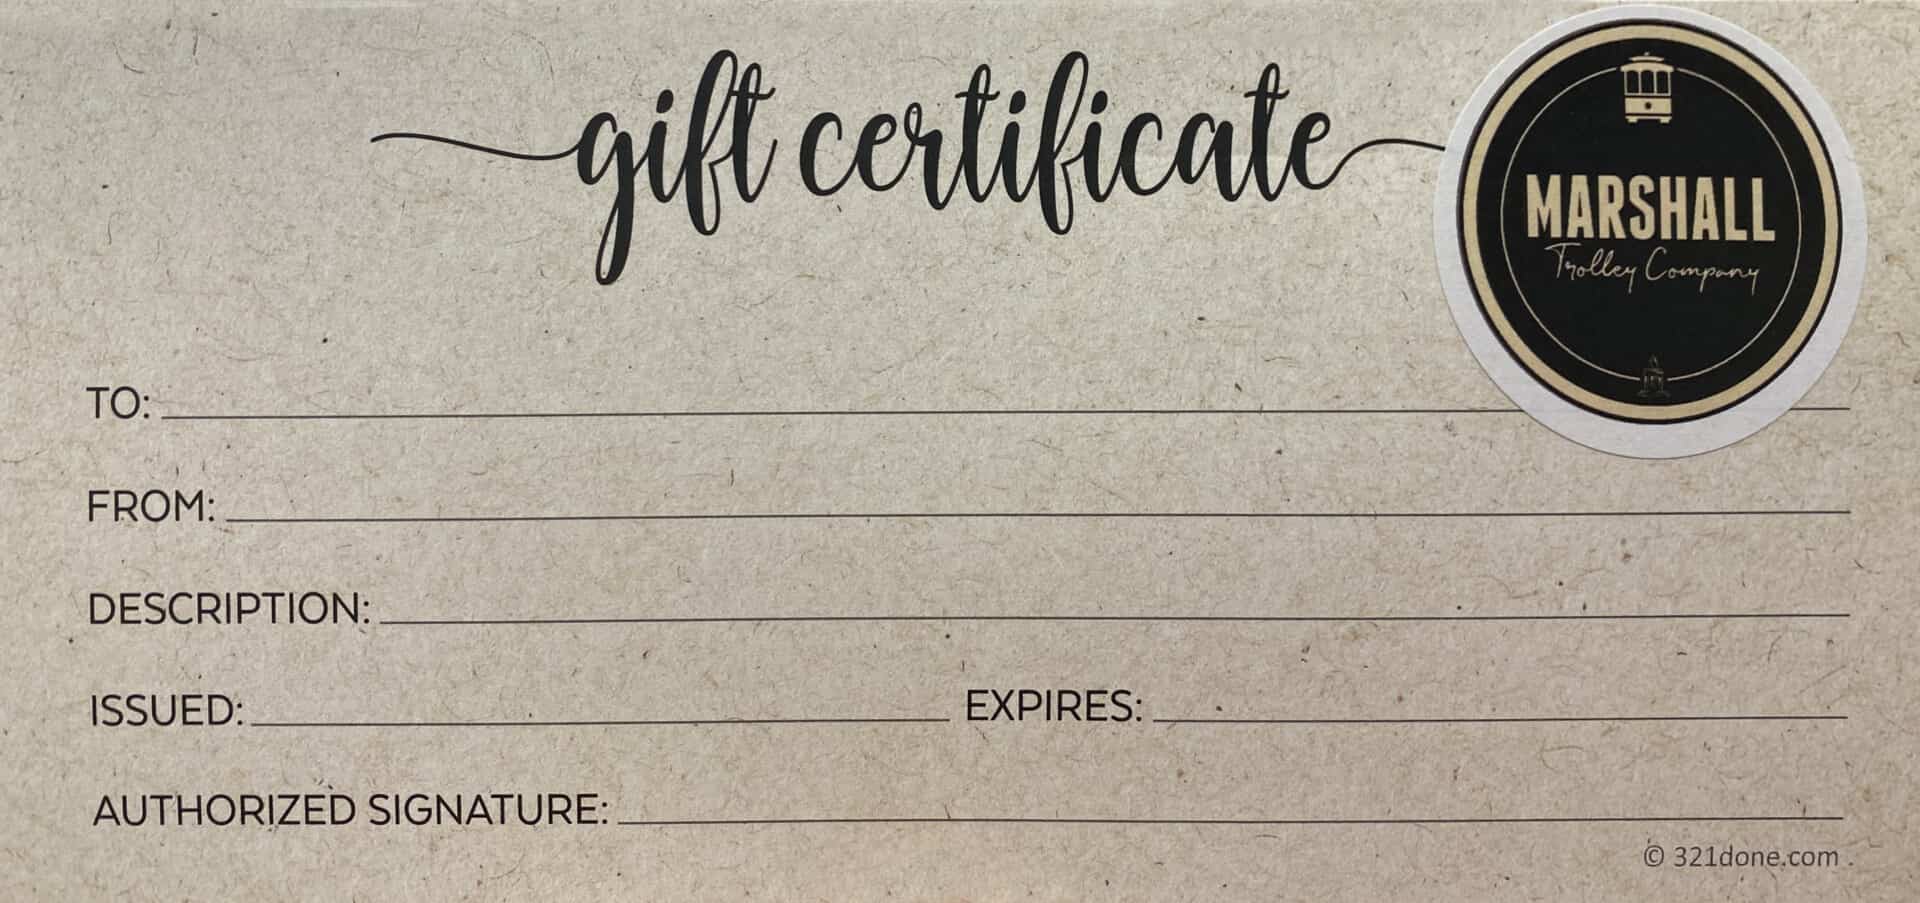 Trolley Gift Certificate photo